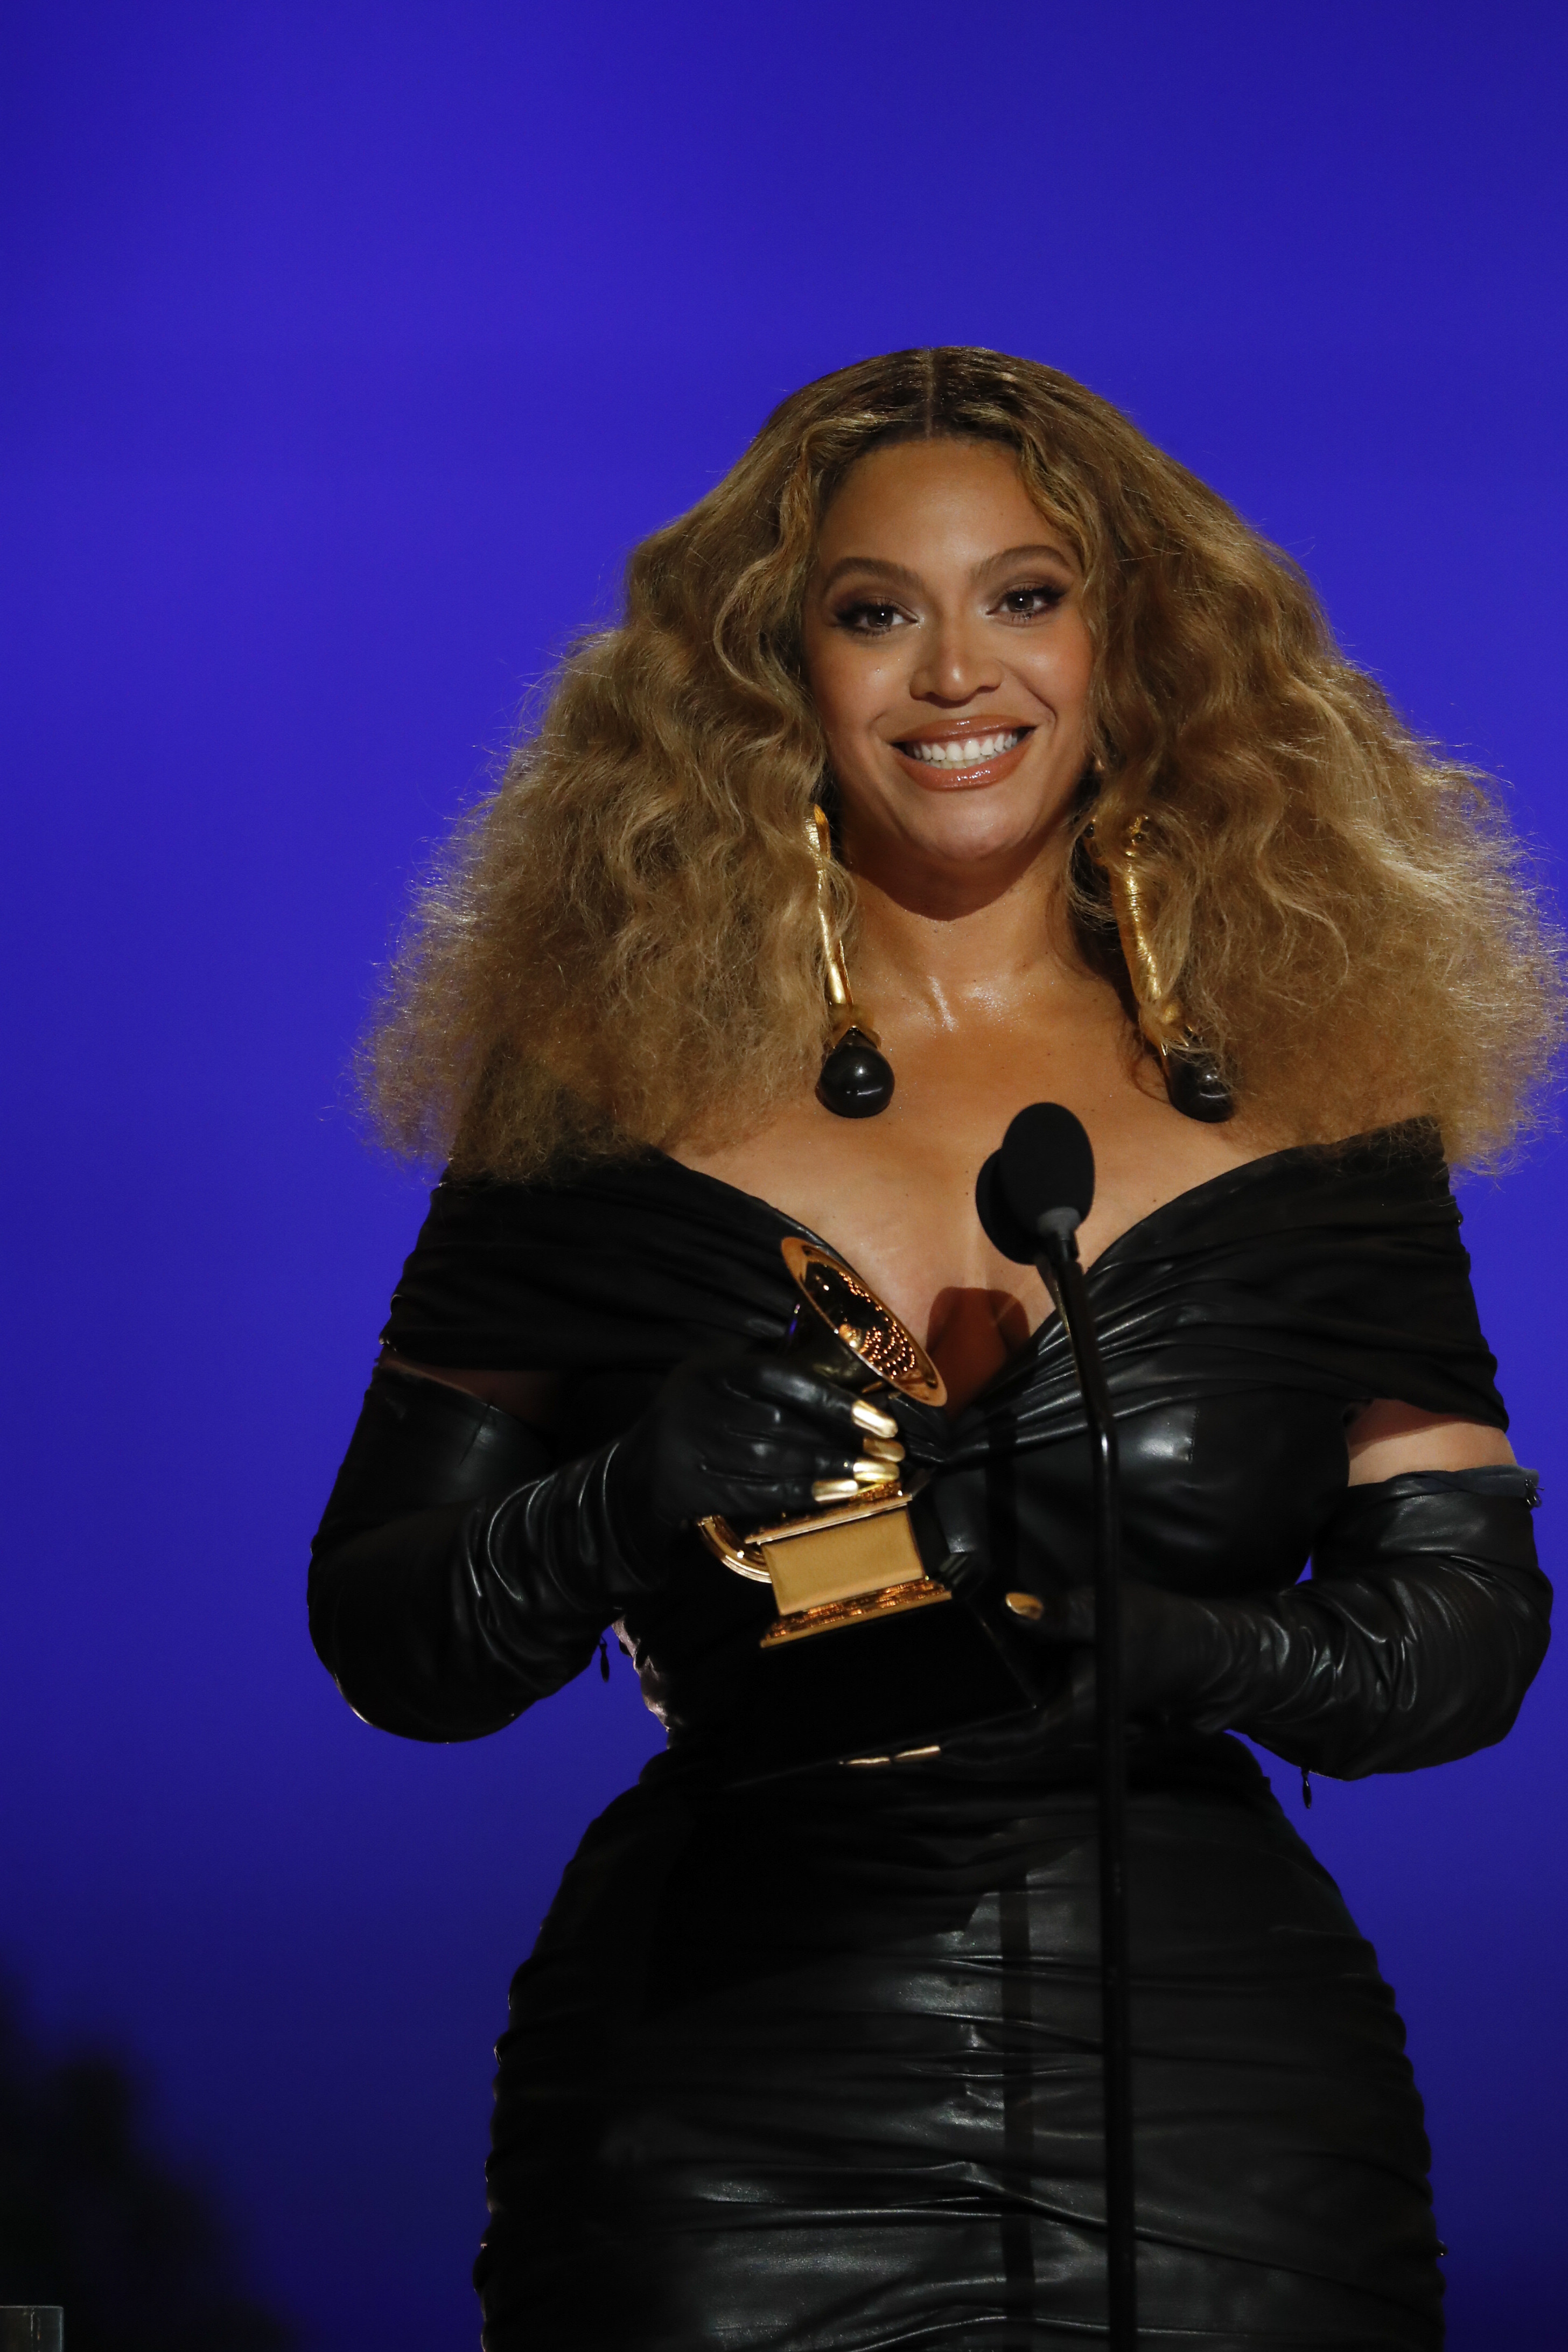 Beyonce accepting a Grammy